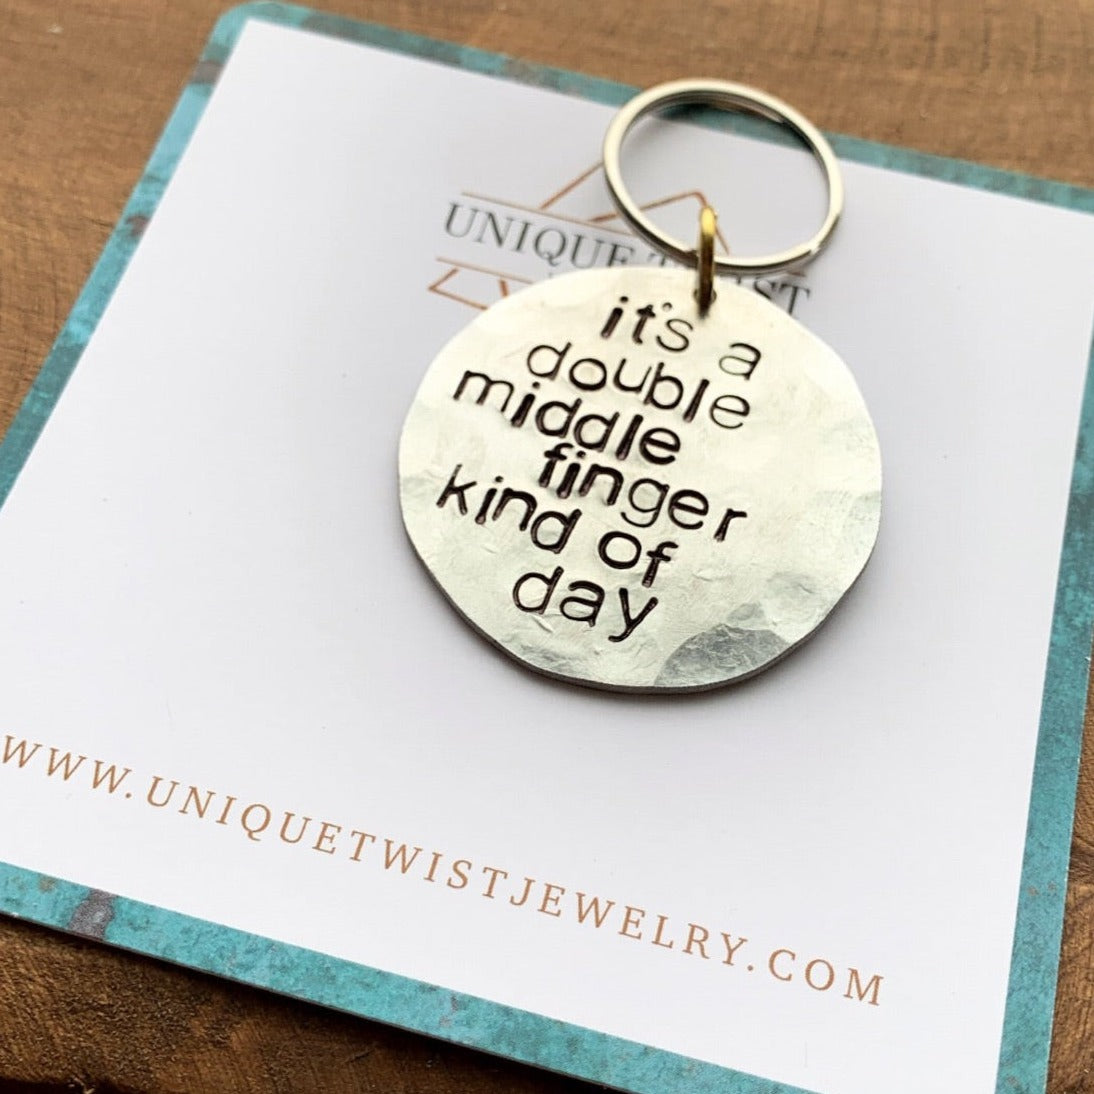 Handstamped Aluminum or brass "It's a double middle finger kind of day"  Handmade keychain.